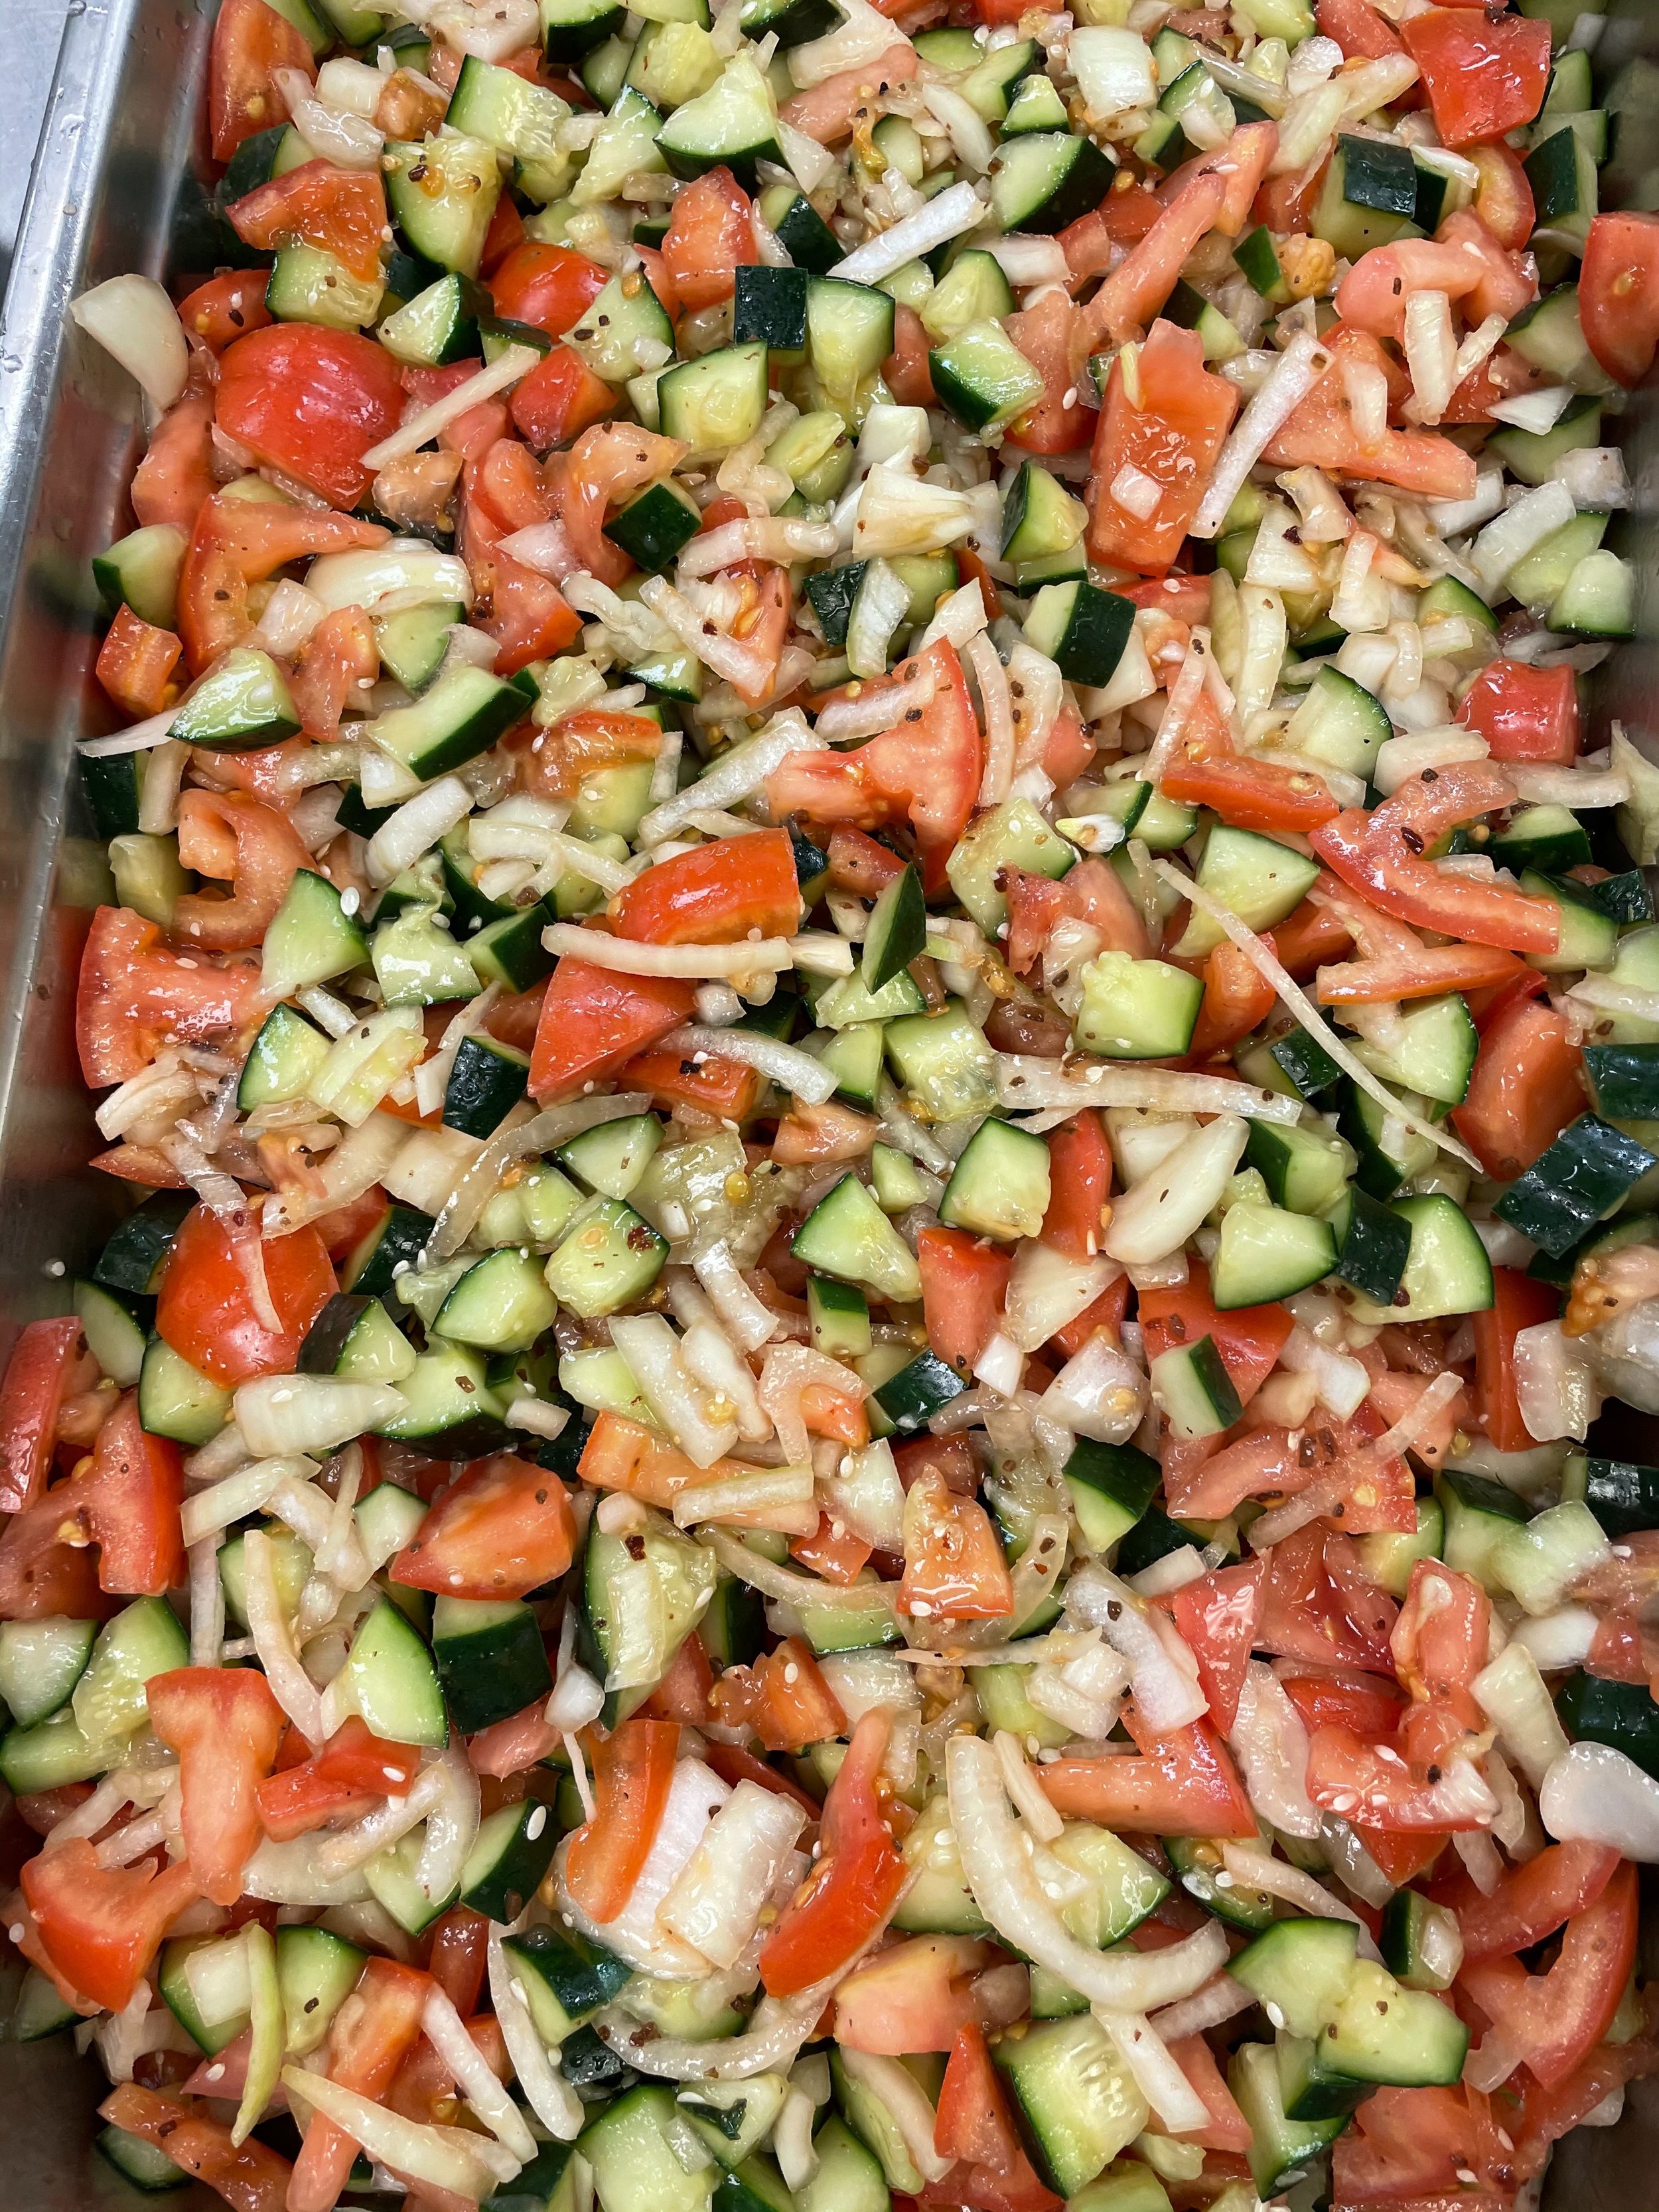 Summer salad featuring zucchini and tomatoes from mercy gardens.jpg